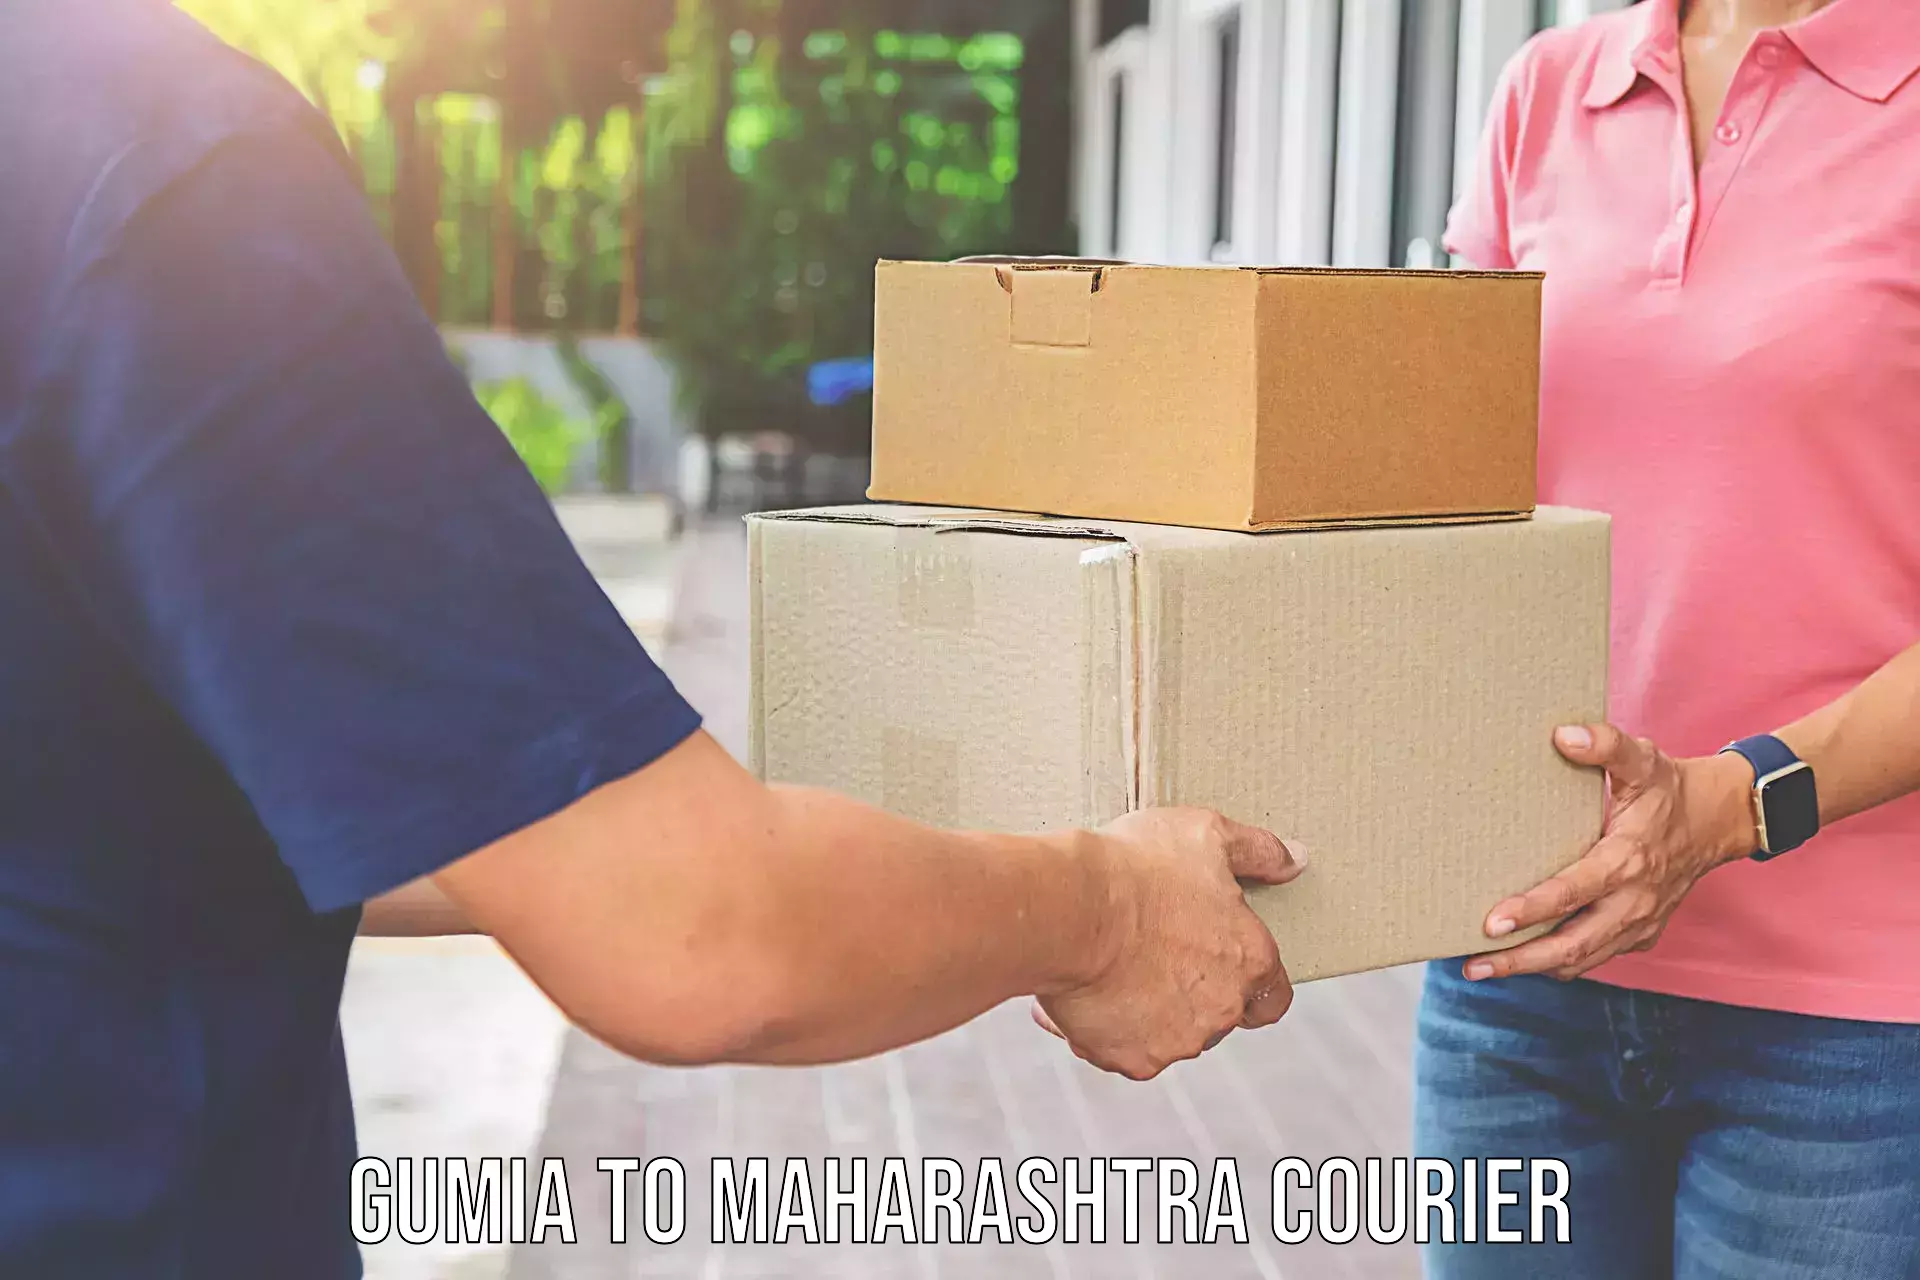 Professional home goods transport in Gumia to Maharashtra